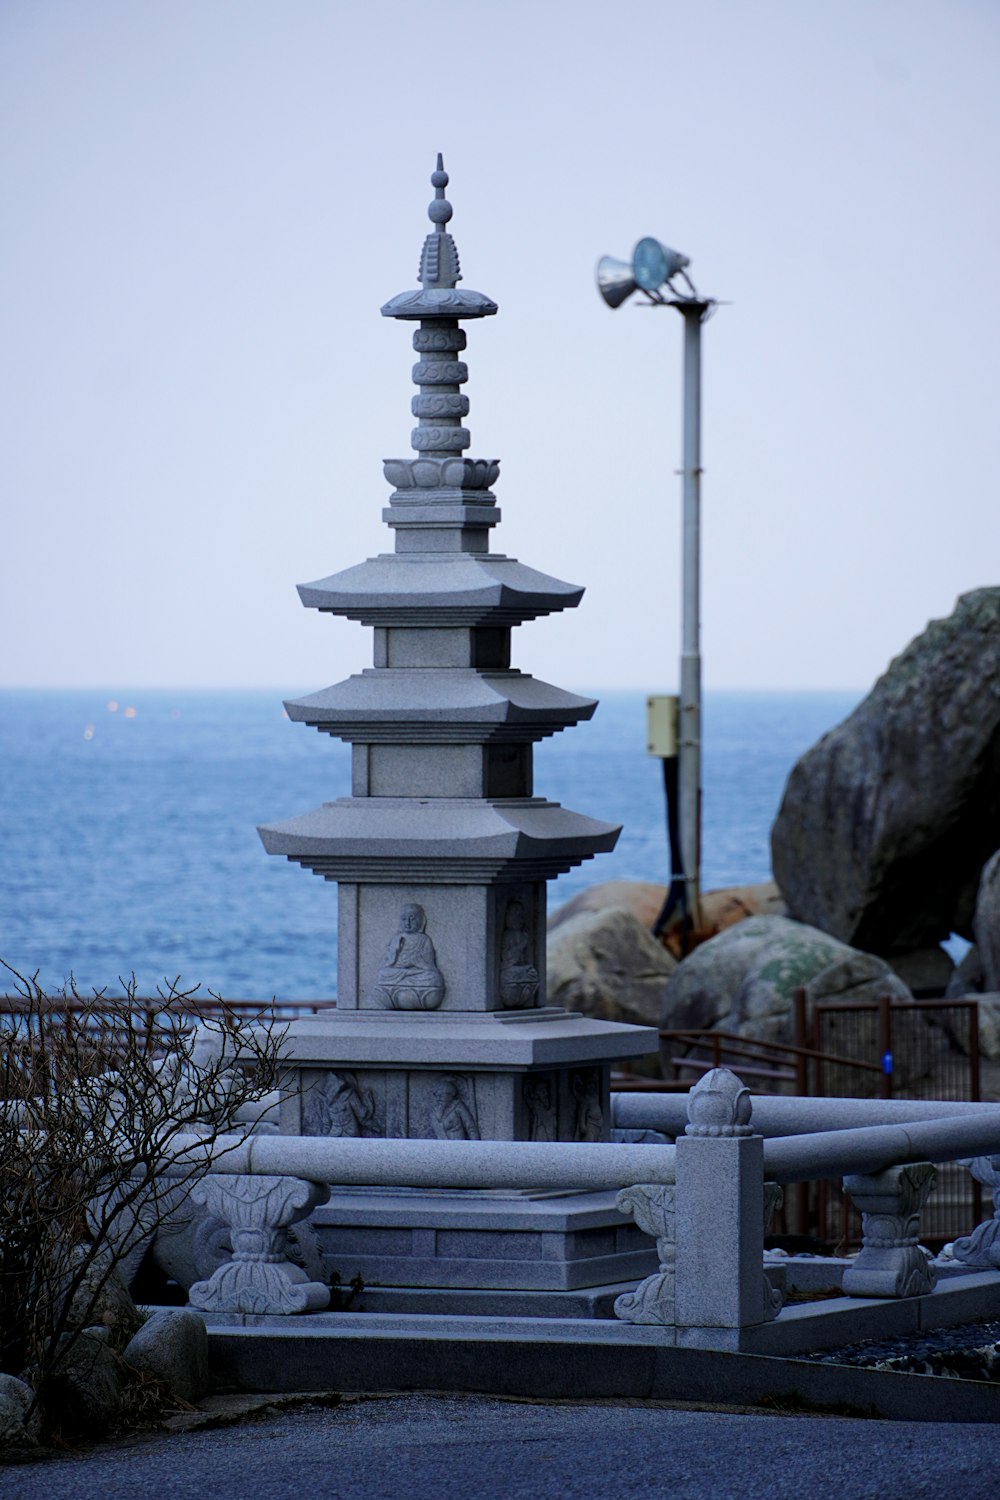 a tall white tower sitting next to the ocean